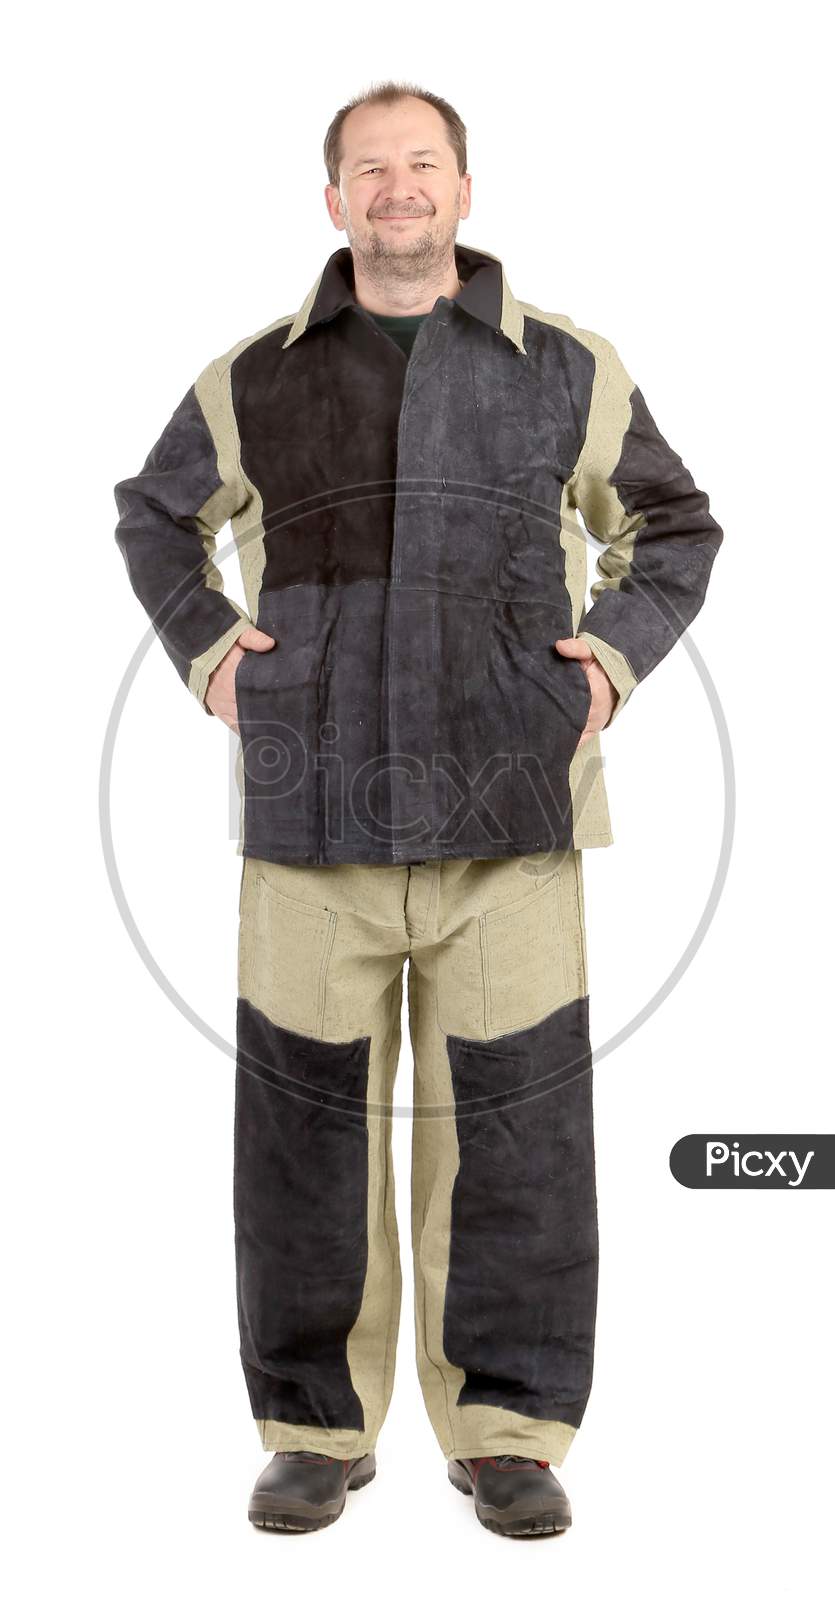 Welder In Workwear Suit. Isolated On A White Background.